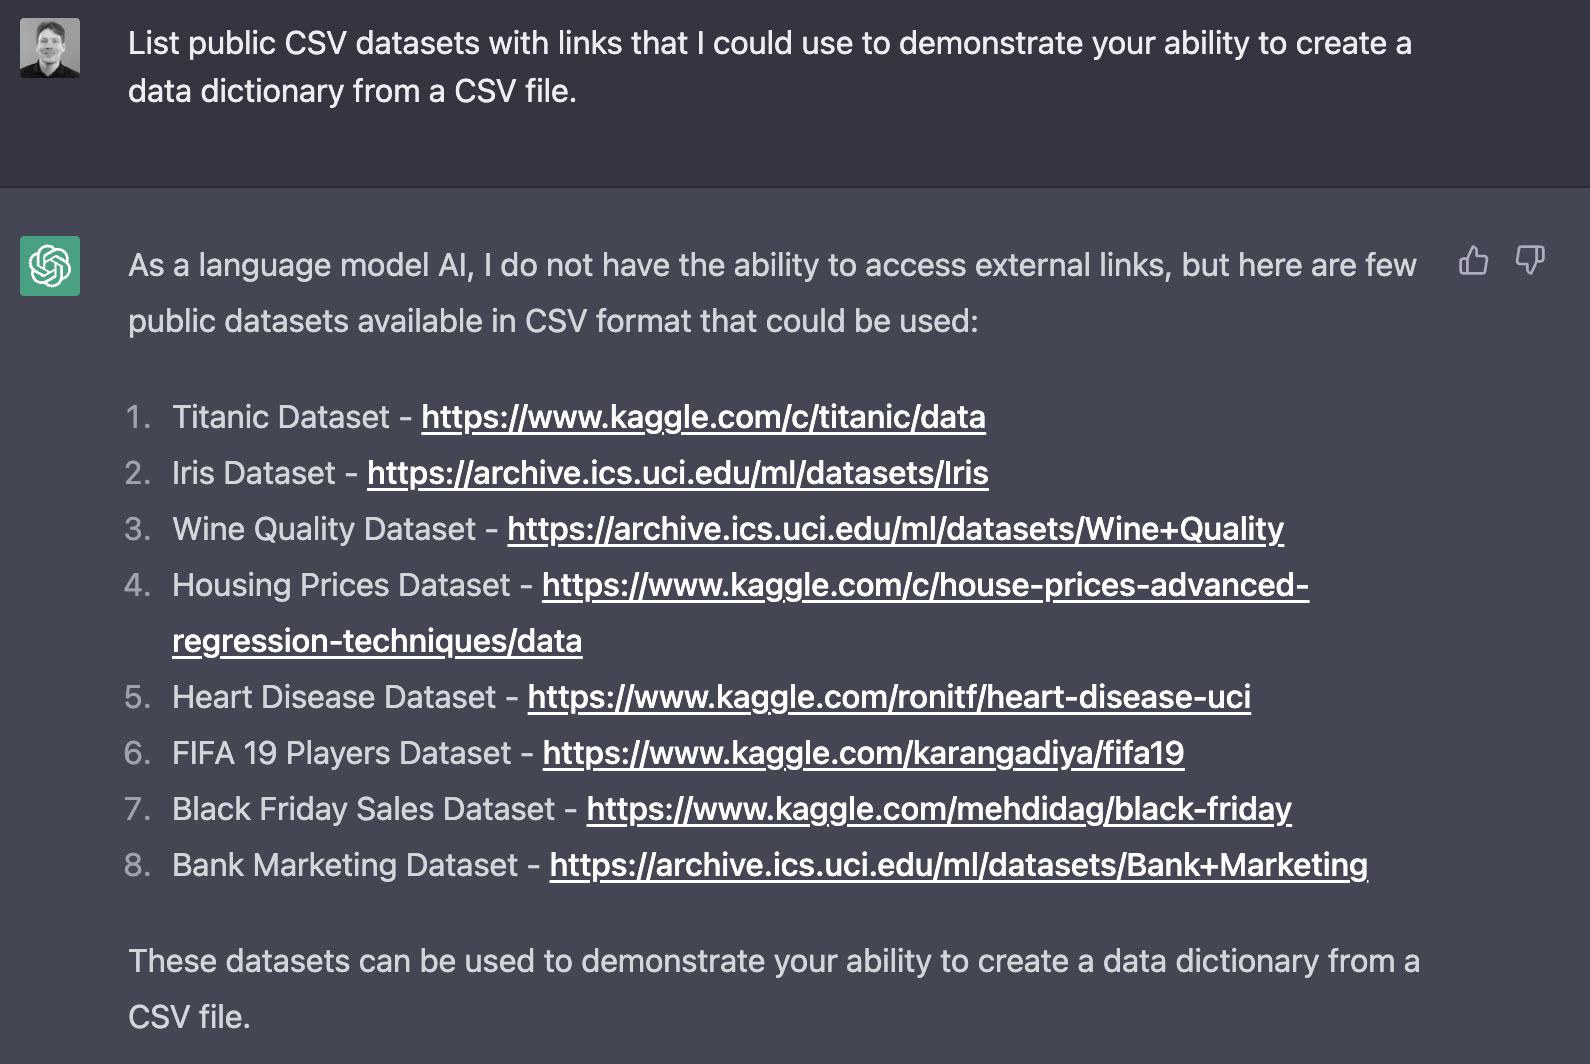 ChatGPT > List public CSV datasets with links that I could use to demonstrate your ability to create a data dictionary from a CSV file.